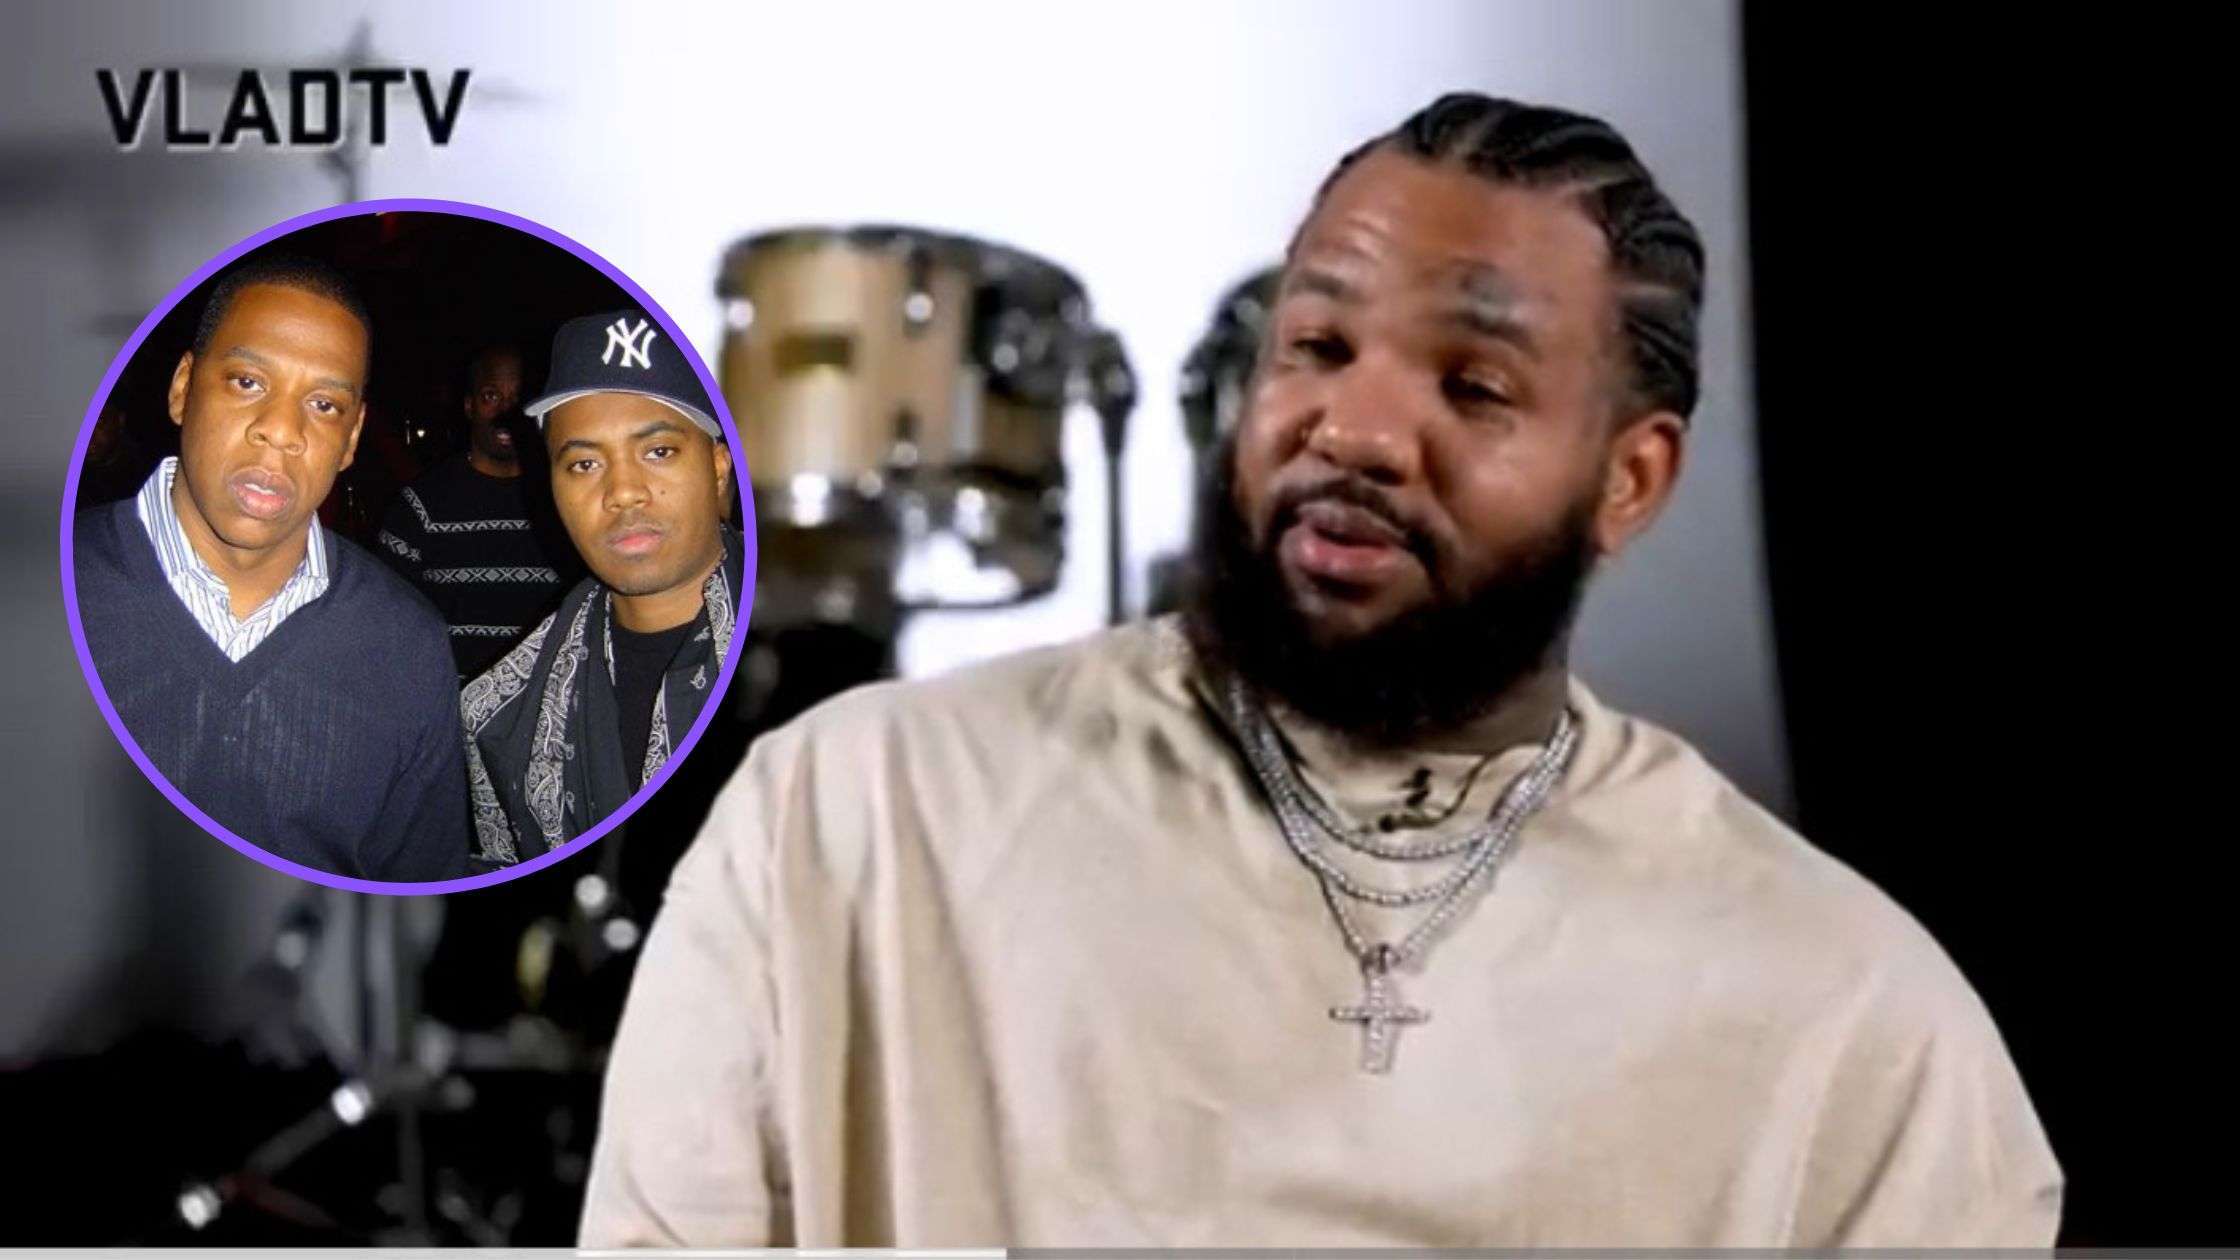 The Game admits he’s a fan of Jay-Z, buy says Nas bodied him on “Ether”